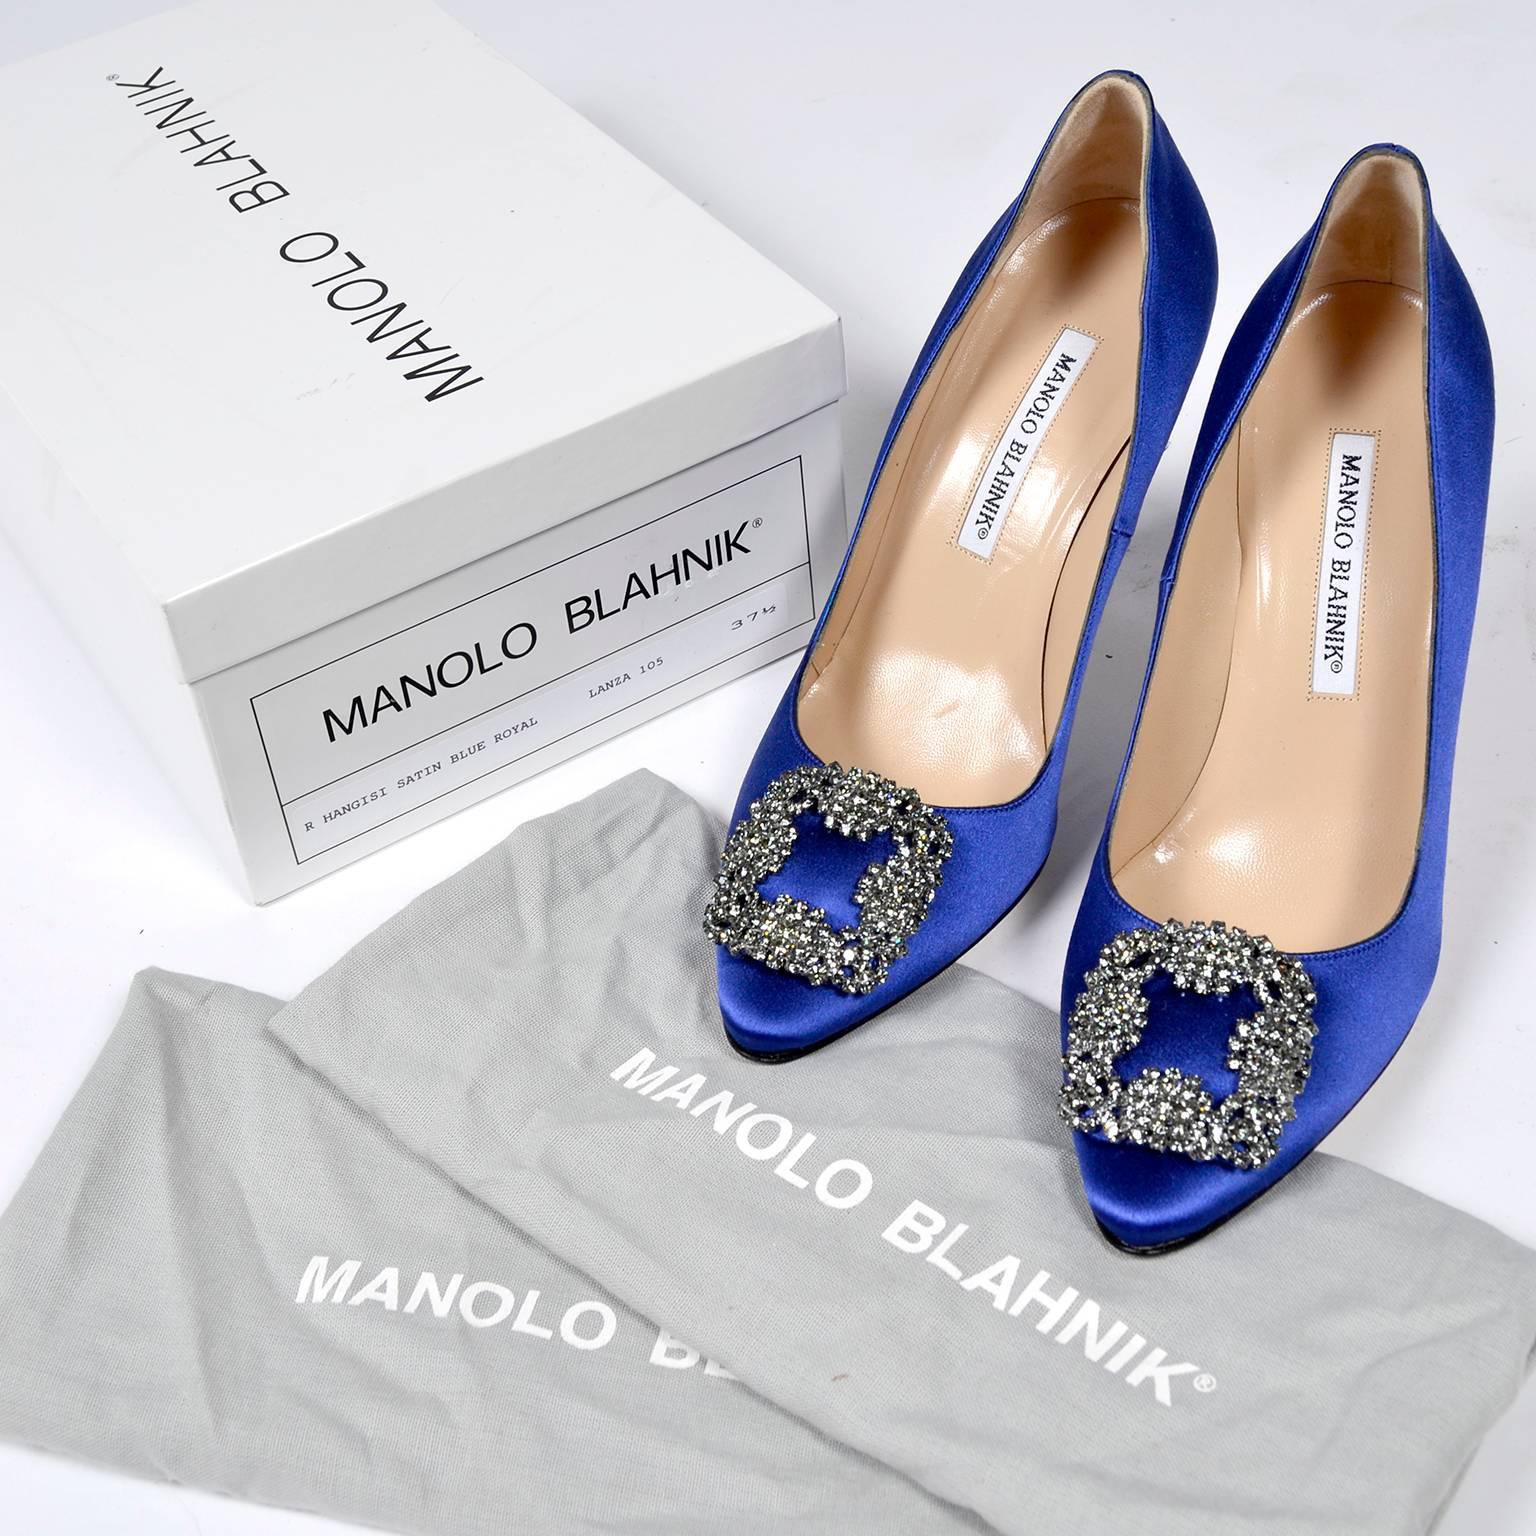 We love these Manolo Blahnik R Hangisi satin blue royal Lanza 105 size 37.5 shoes. These gorgeous blue satin shoes come with their original dust bags and box.  These Manolo Blahnik heels still retail for over $950 and were the same style worn by